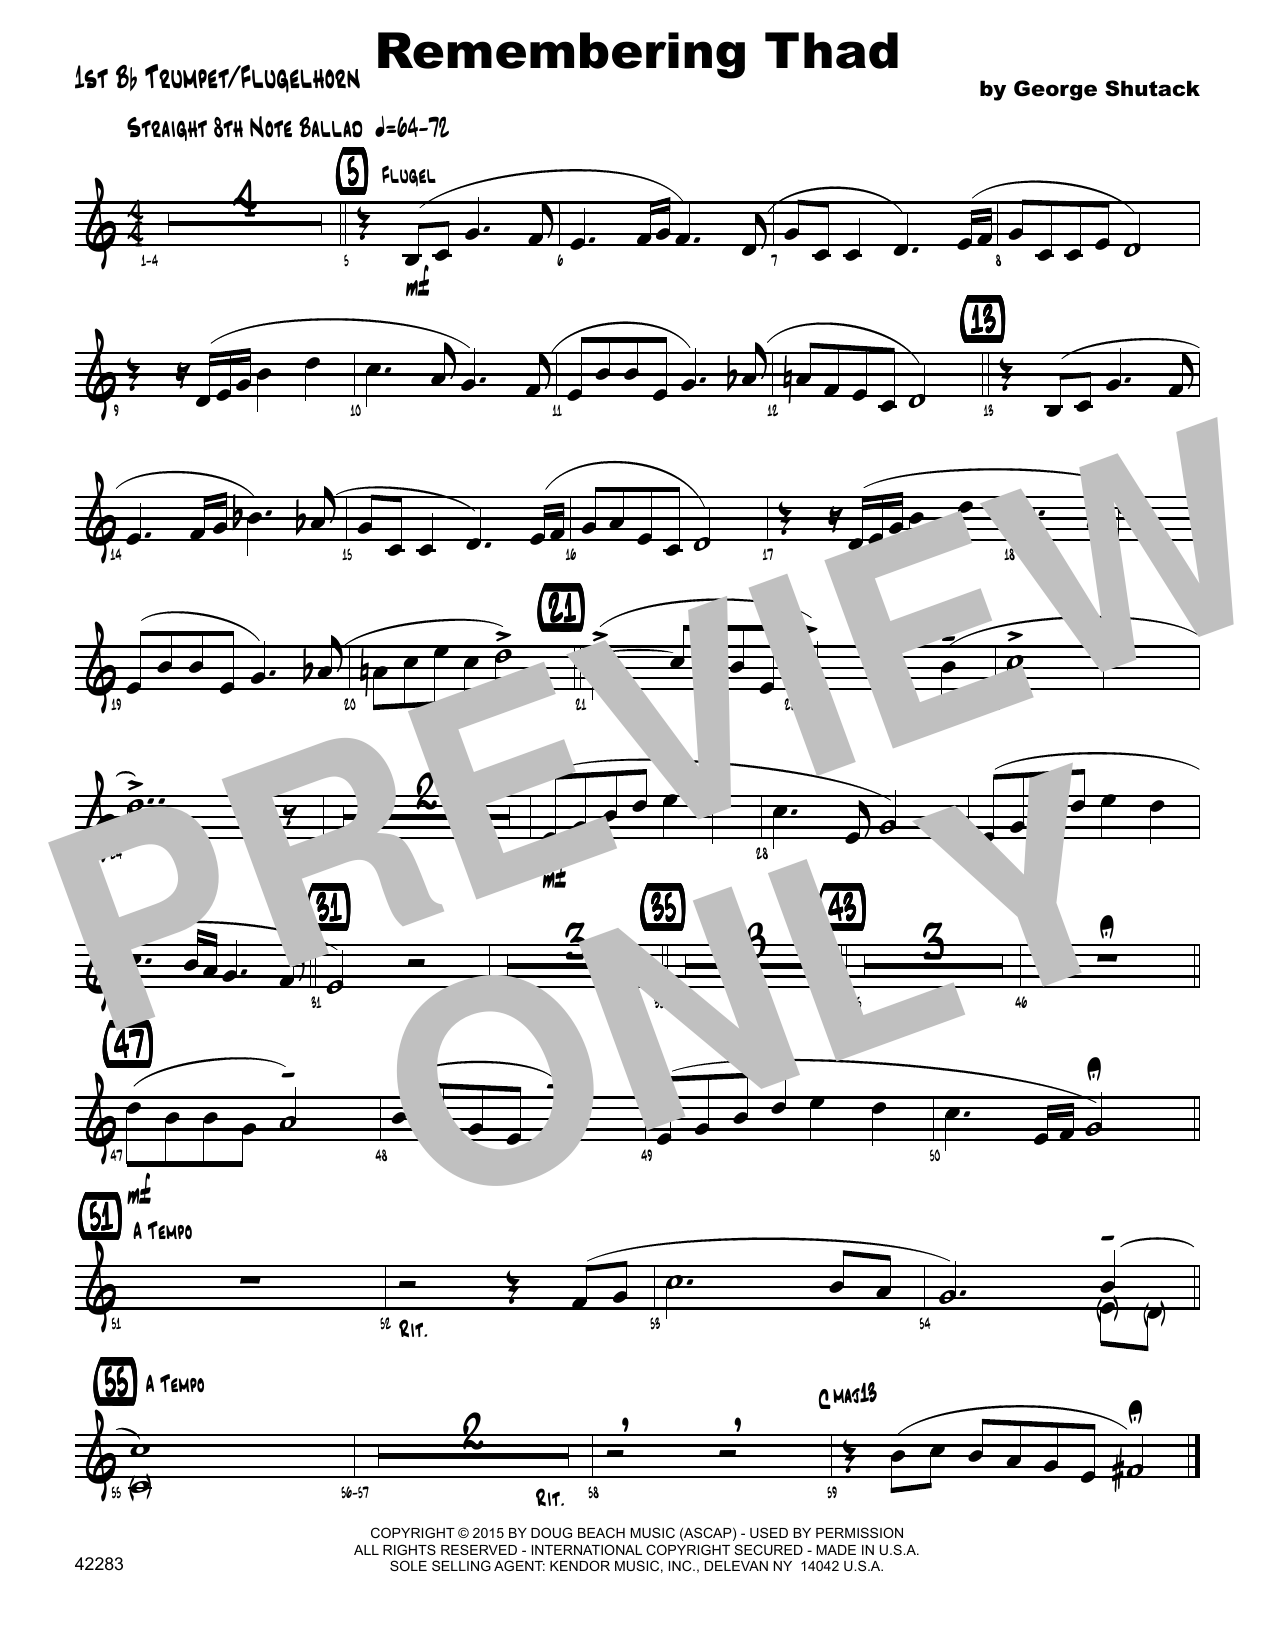 Download George Shutack Remembering Thad - 1st Bb Trumpet Sheet Music